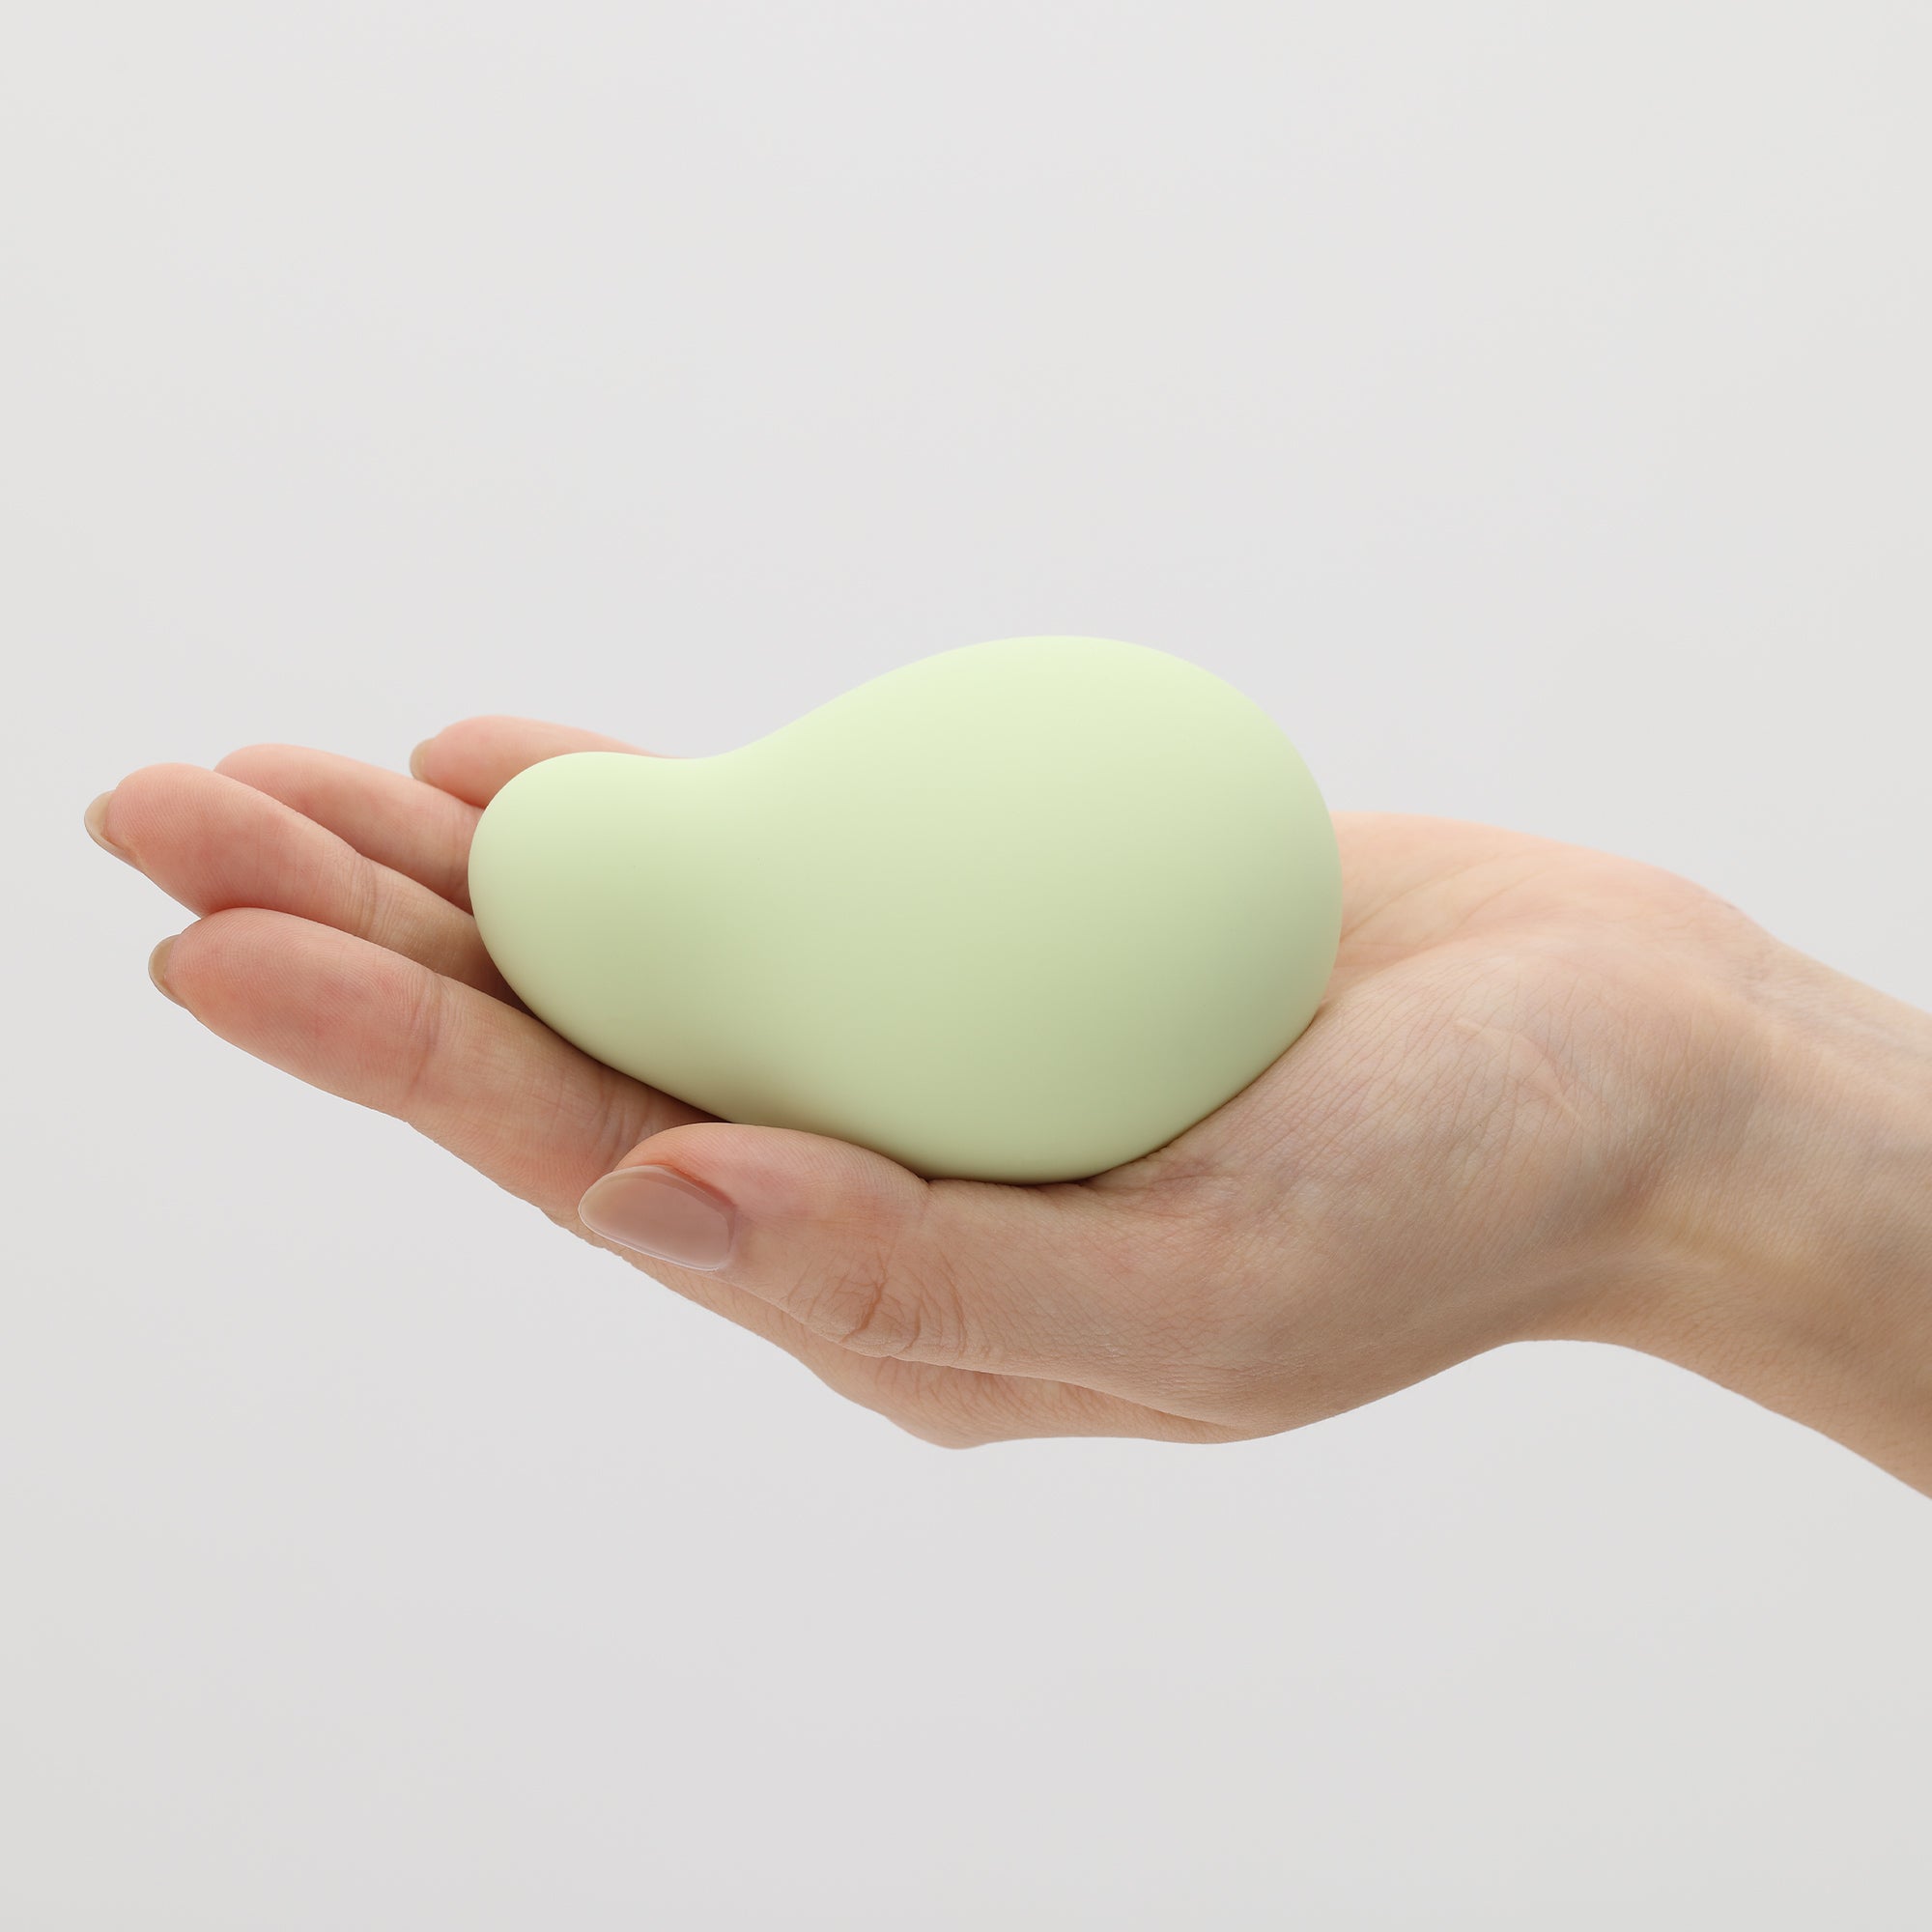 Iroha Midori, a sophisticated female personal pleasure device designed for ergonomic comfort and intimate enjoyment. With a soft pink hue and graceful curves, this product is available from the UK TENGA STORE and reflects an artful blend of form and function